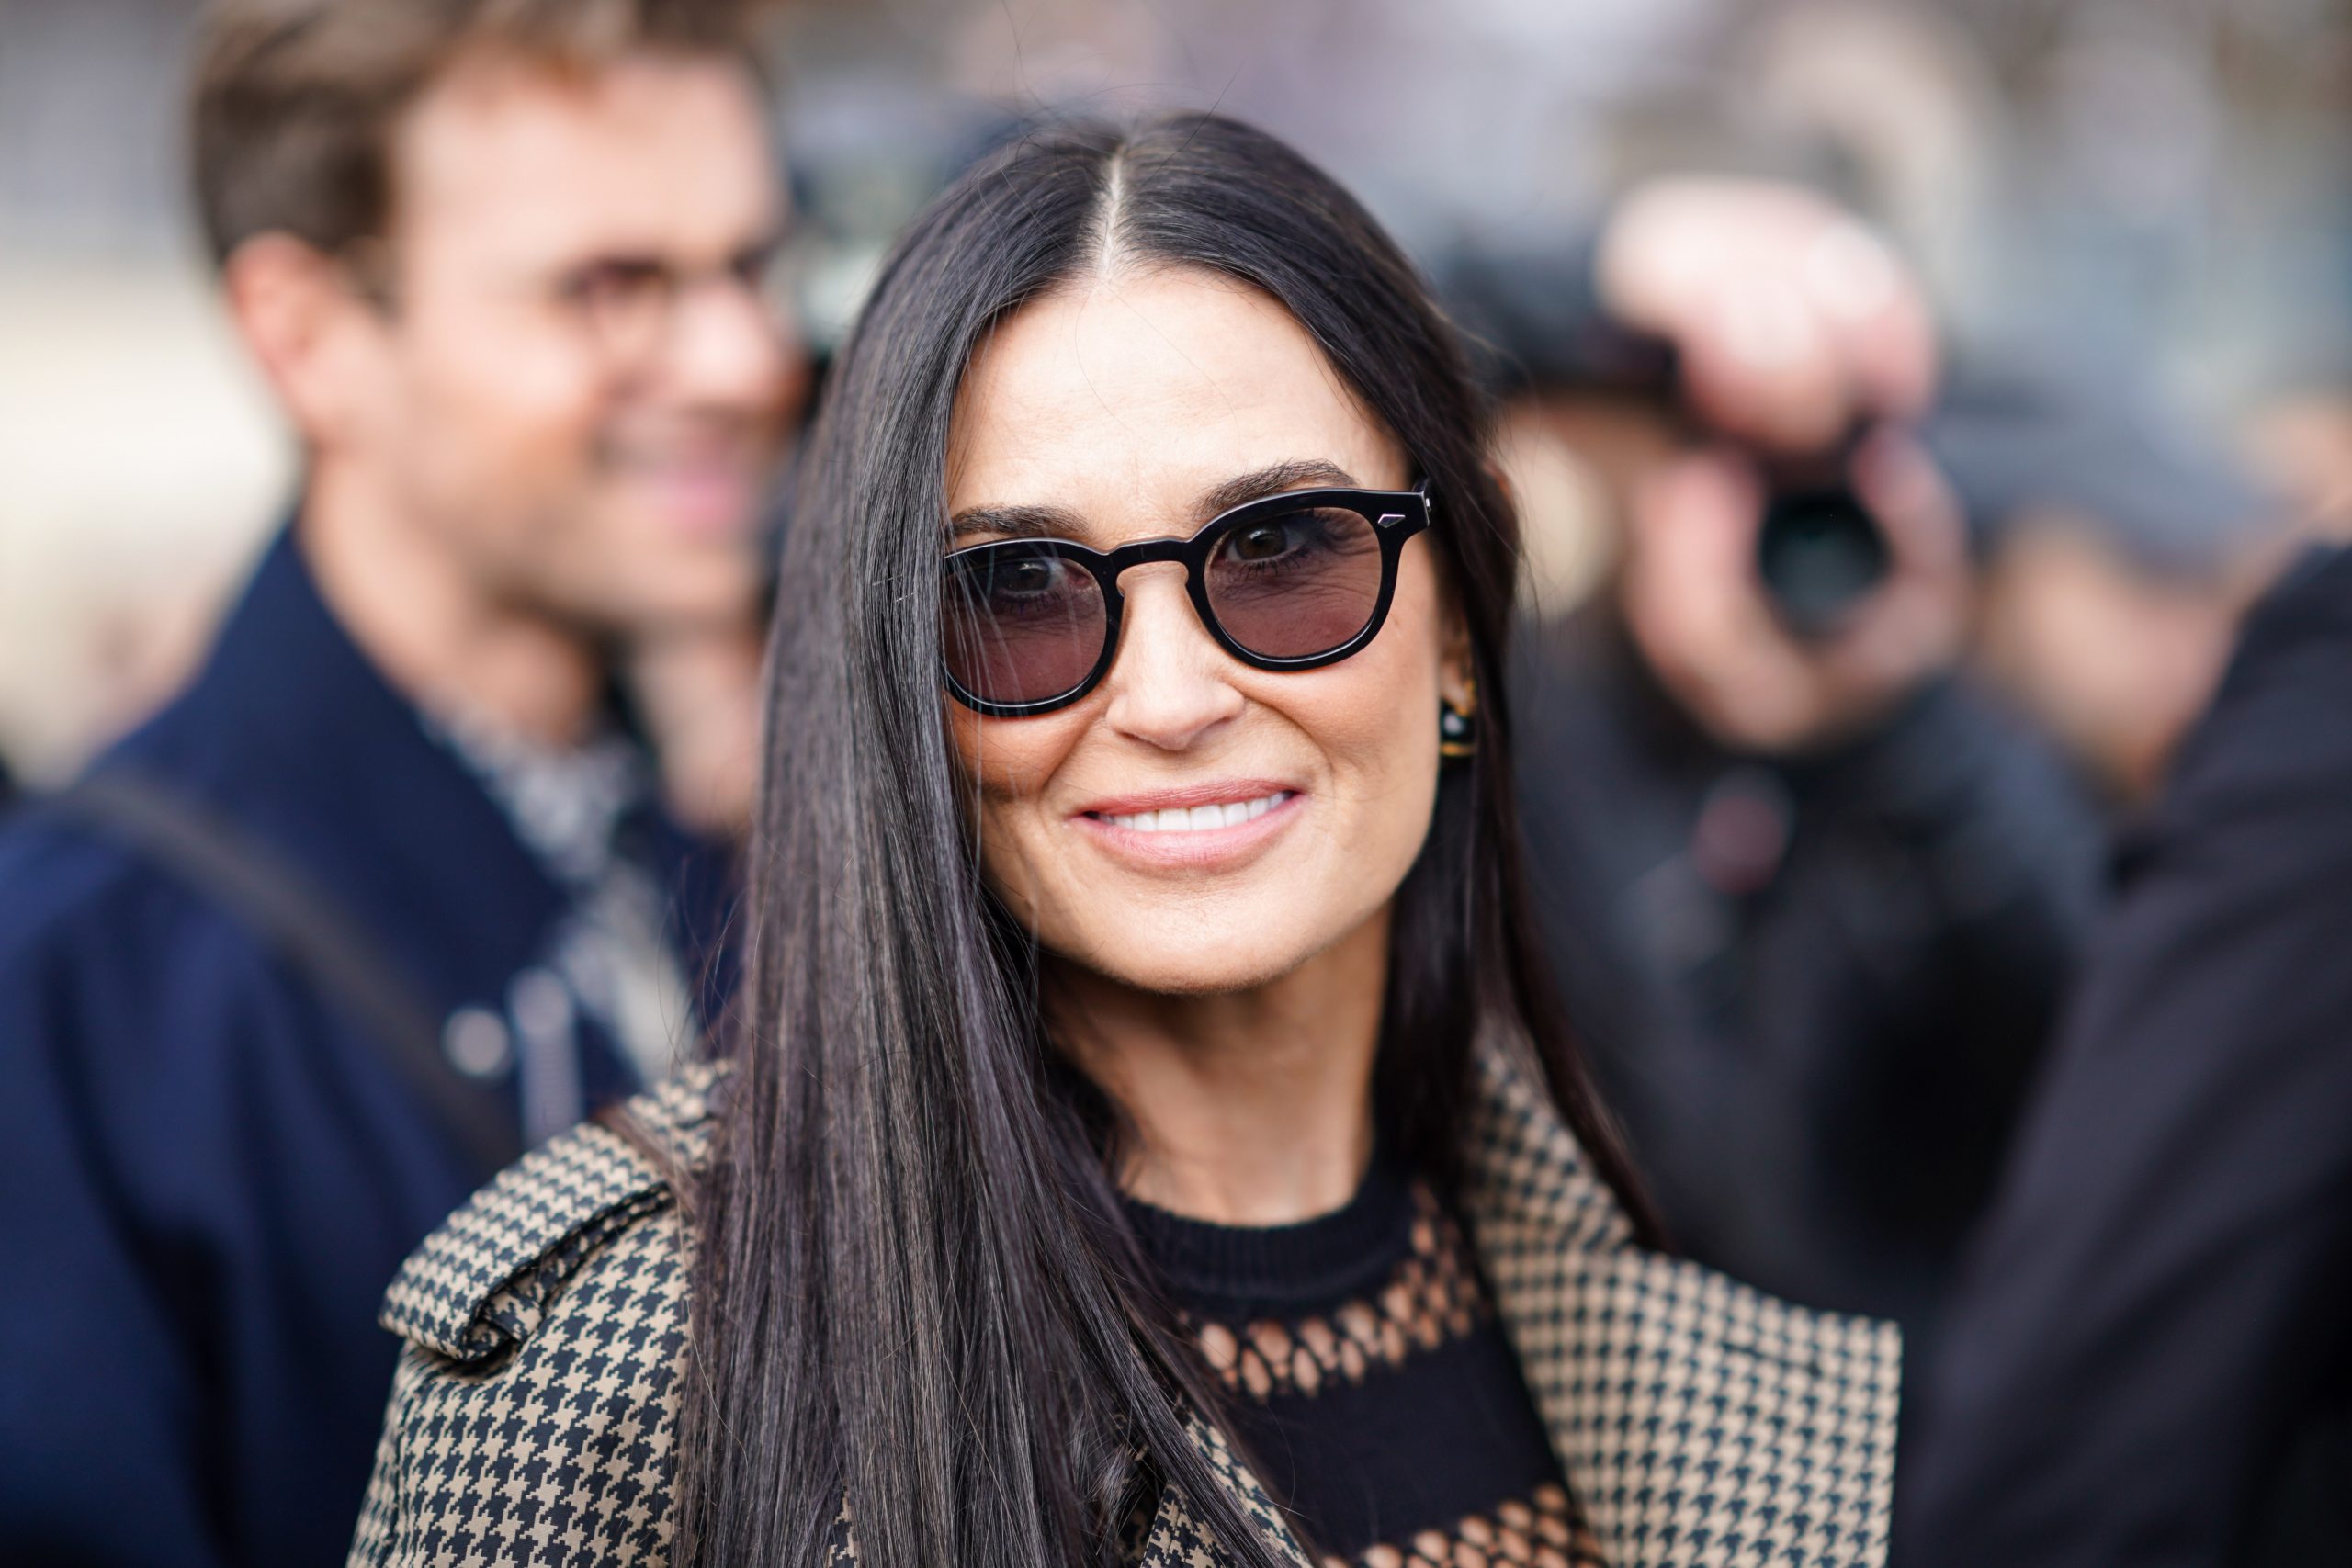 Demi Moore Shares Long Hair in New Photo